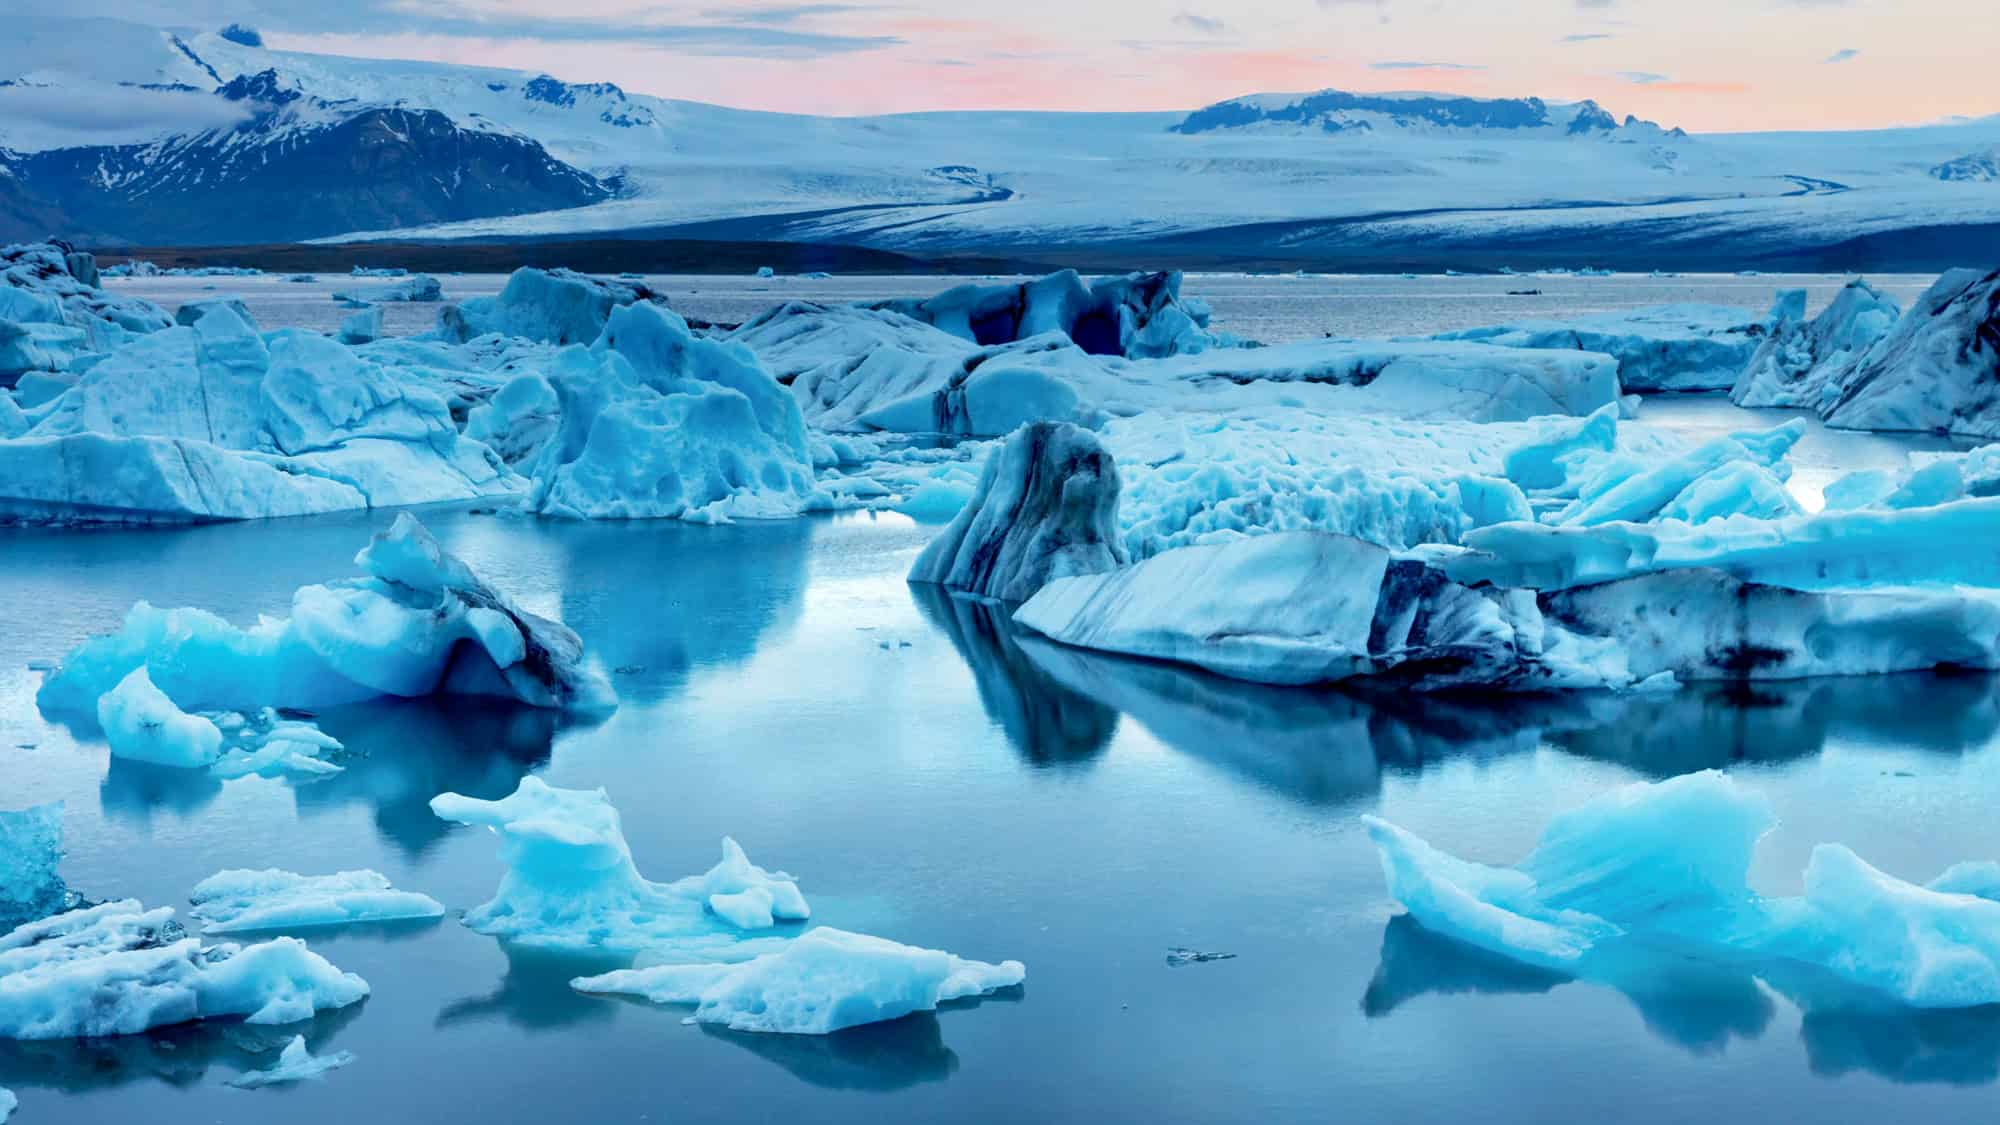 <p>Picture this: giant chunks of ice doing the backstroke in a serene, blue lagoon. That’s Jökulsárlón for you—a glacier lagoon that looks like nature decided to flex its artistic muscles. <strong>It even comes with seals showing off on their icy lounge chairs</strong> and the epic backdrop of Europe’s largest glacier, Vatnajökull. </p> <p>Believe you me, your camera won’t know what hit it. Snap a photo here, and you’ll have everyone thinking you’ve discovered a new level of cool. <em>Literally.</em></p> <div class="wp-block-kadence-iconlist kt-svg-icon-list-items kt-svg-icon-list-items4232_007243-a7 kt-svg-icon-list-columns-1 alignnone"> <ul class="kt-svg-icon-list"> <li class="wp-block-kadence-listitem kt-svg-icon-list-item-wrap kt-svg-icon-list-item-4232_9b5e65-a9"><span><strong>Best time to visit</strong>: Early morning, to catch the calm before the tourist storm.</span></li> </ul> </div>